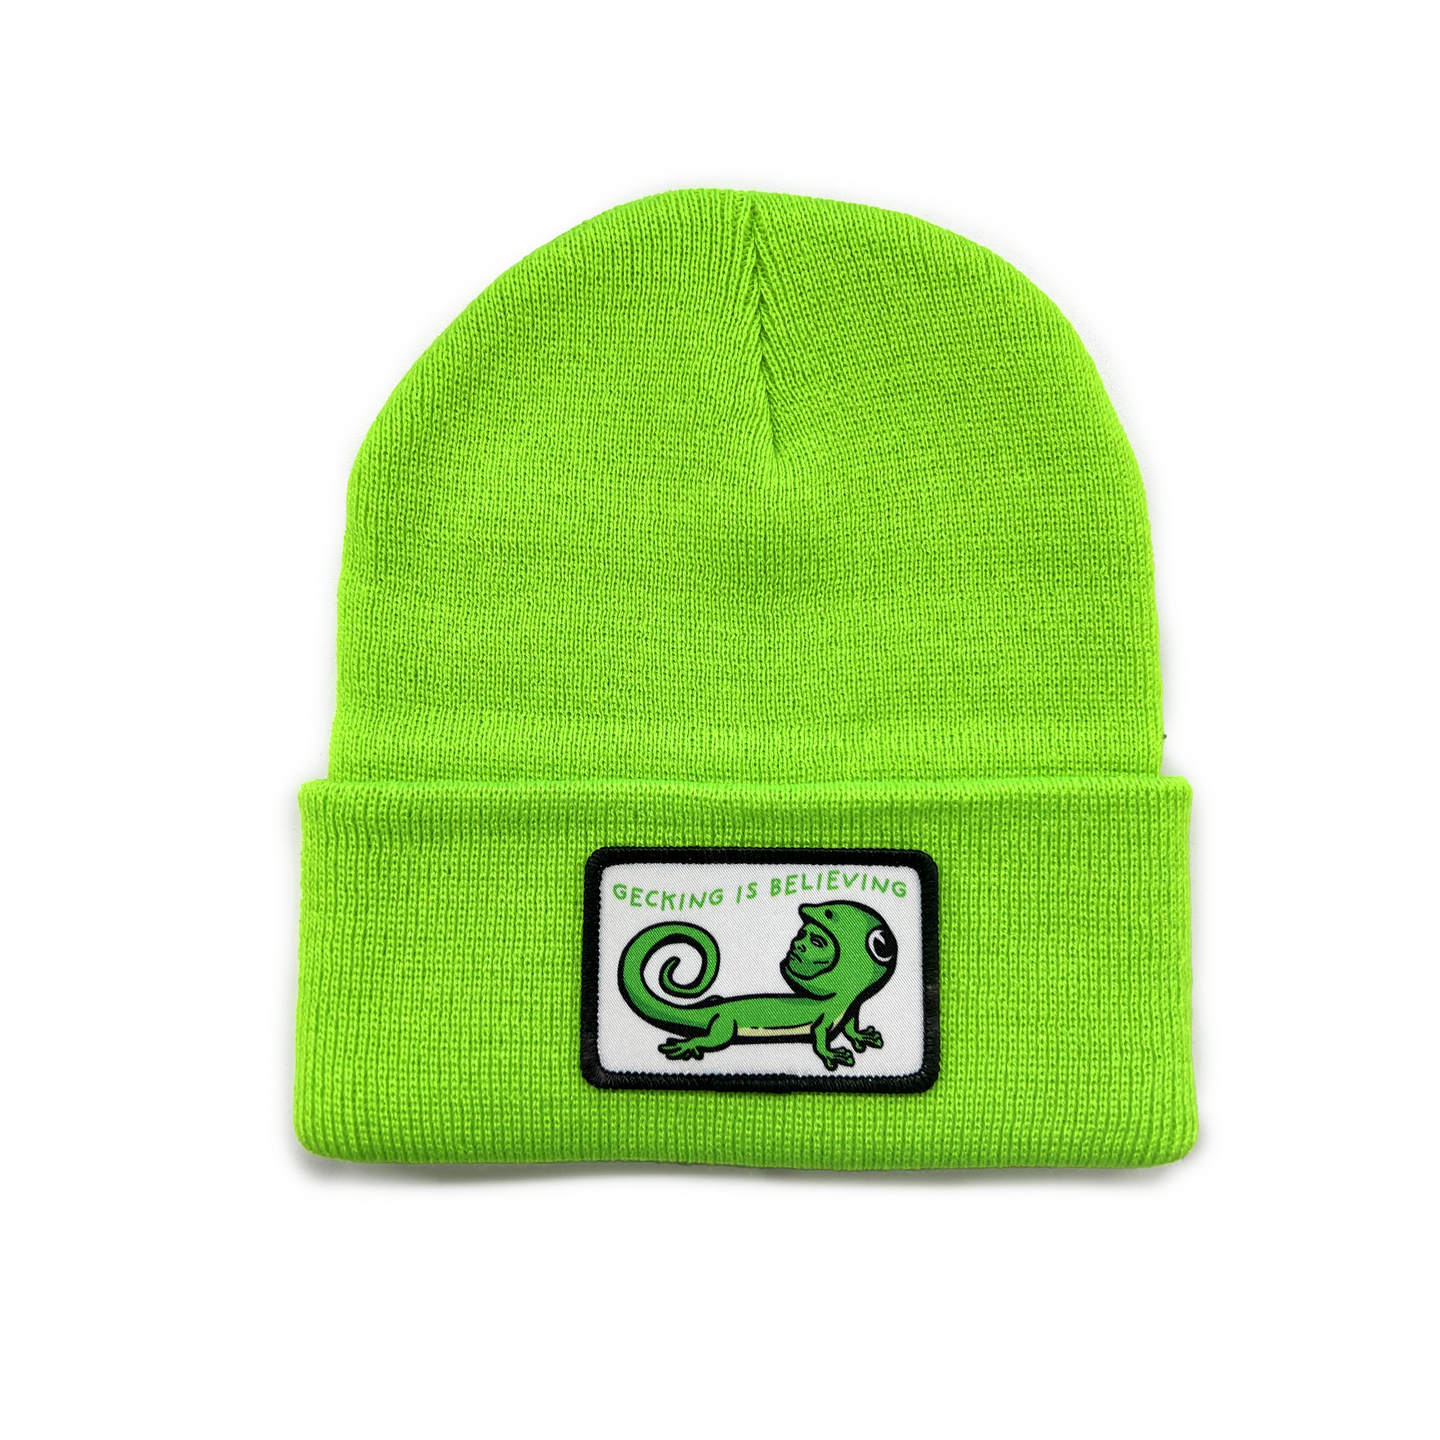 GECKING IS BELIEVING BEANIE